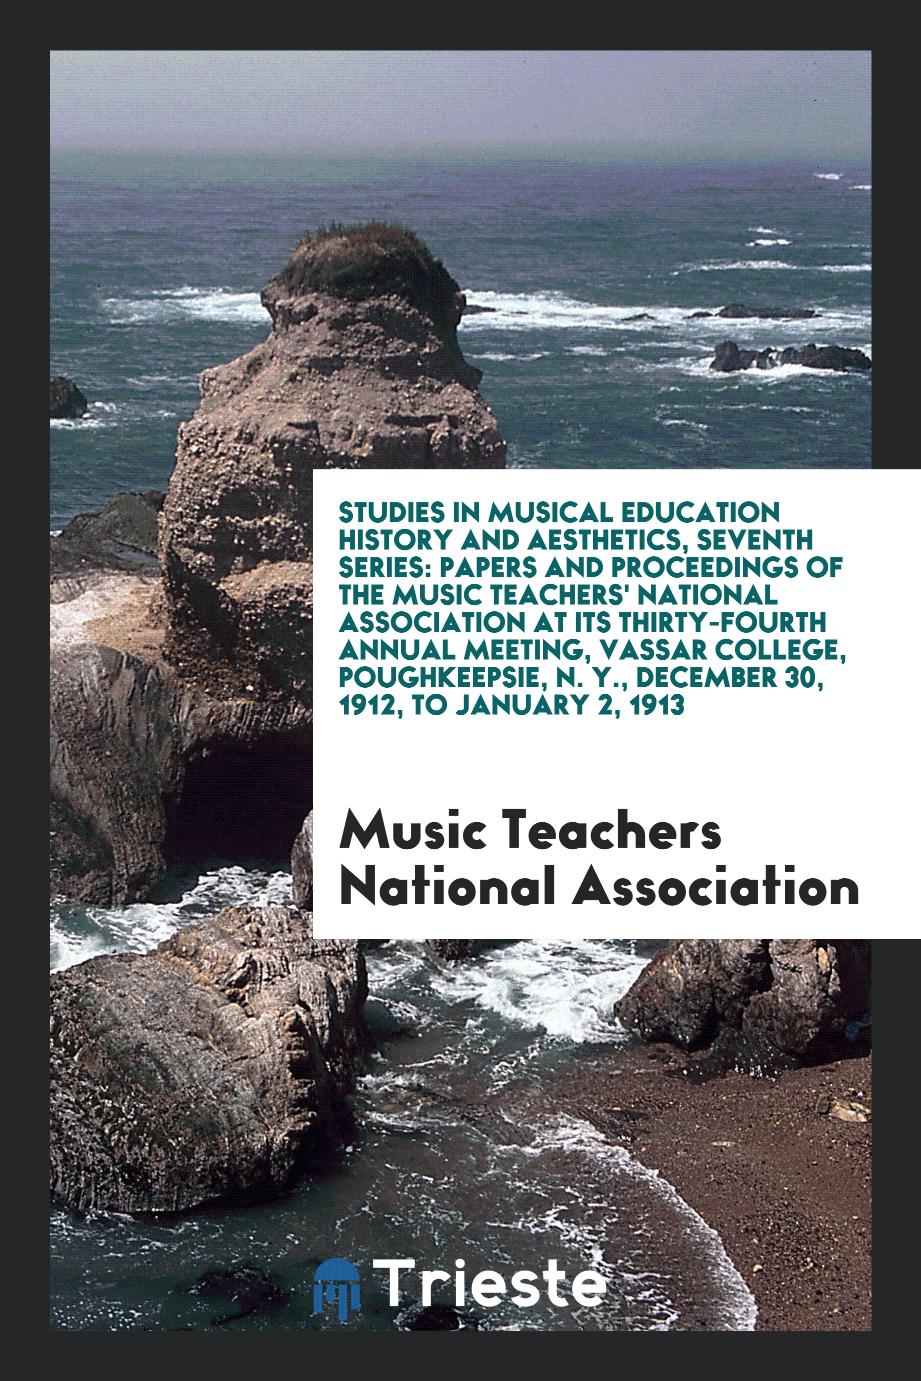 Studies in Musical Education History and Aesthetics, Seventh Series: Papers and Proceedings of the Music Teachers' National Association at Its Thirty-Fourth Annual Meeting, Vassar College, Poughkeepsie, N. Y., December 30, 1912, to January 2, 1913